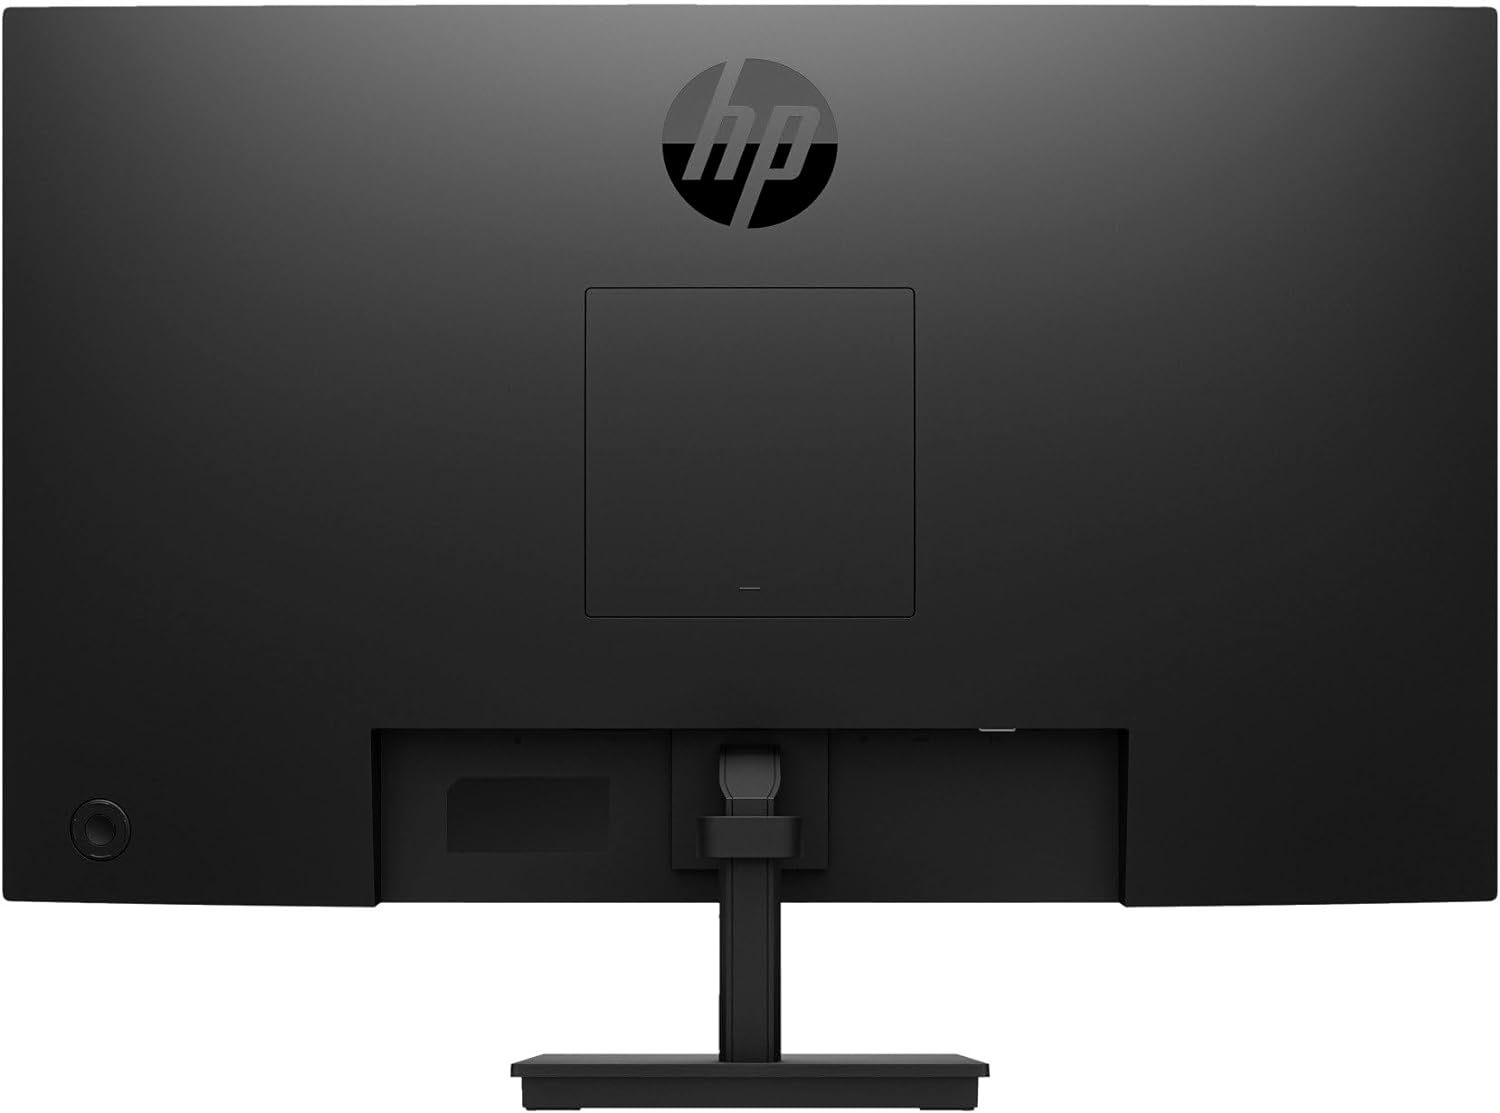 HP 27 QHD IPS (2560x1440) Monitor Bundle with Docztorm Dock, 60Hz Refresh Rate, 1 HDMI 1.4, 1 VGA, Anti-Glare, Flicker-Free, Ideal for Home  Business, Black/Silver (2024 Latest Model) (2 Pack)